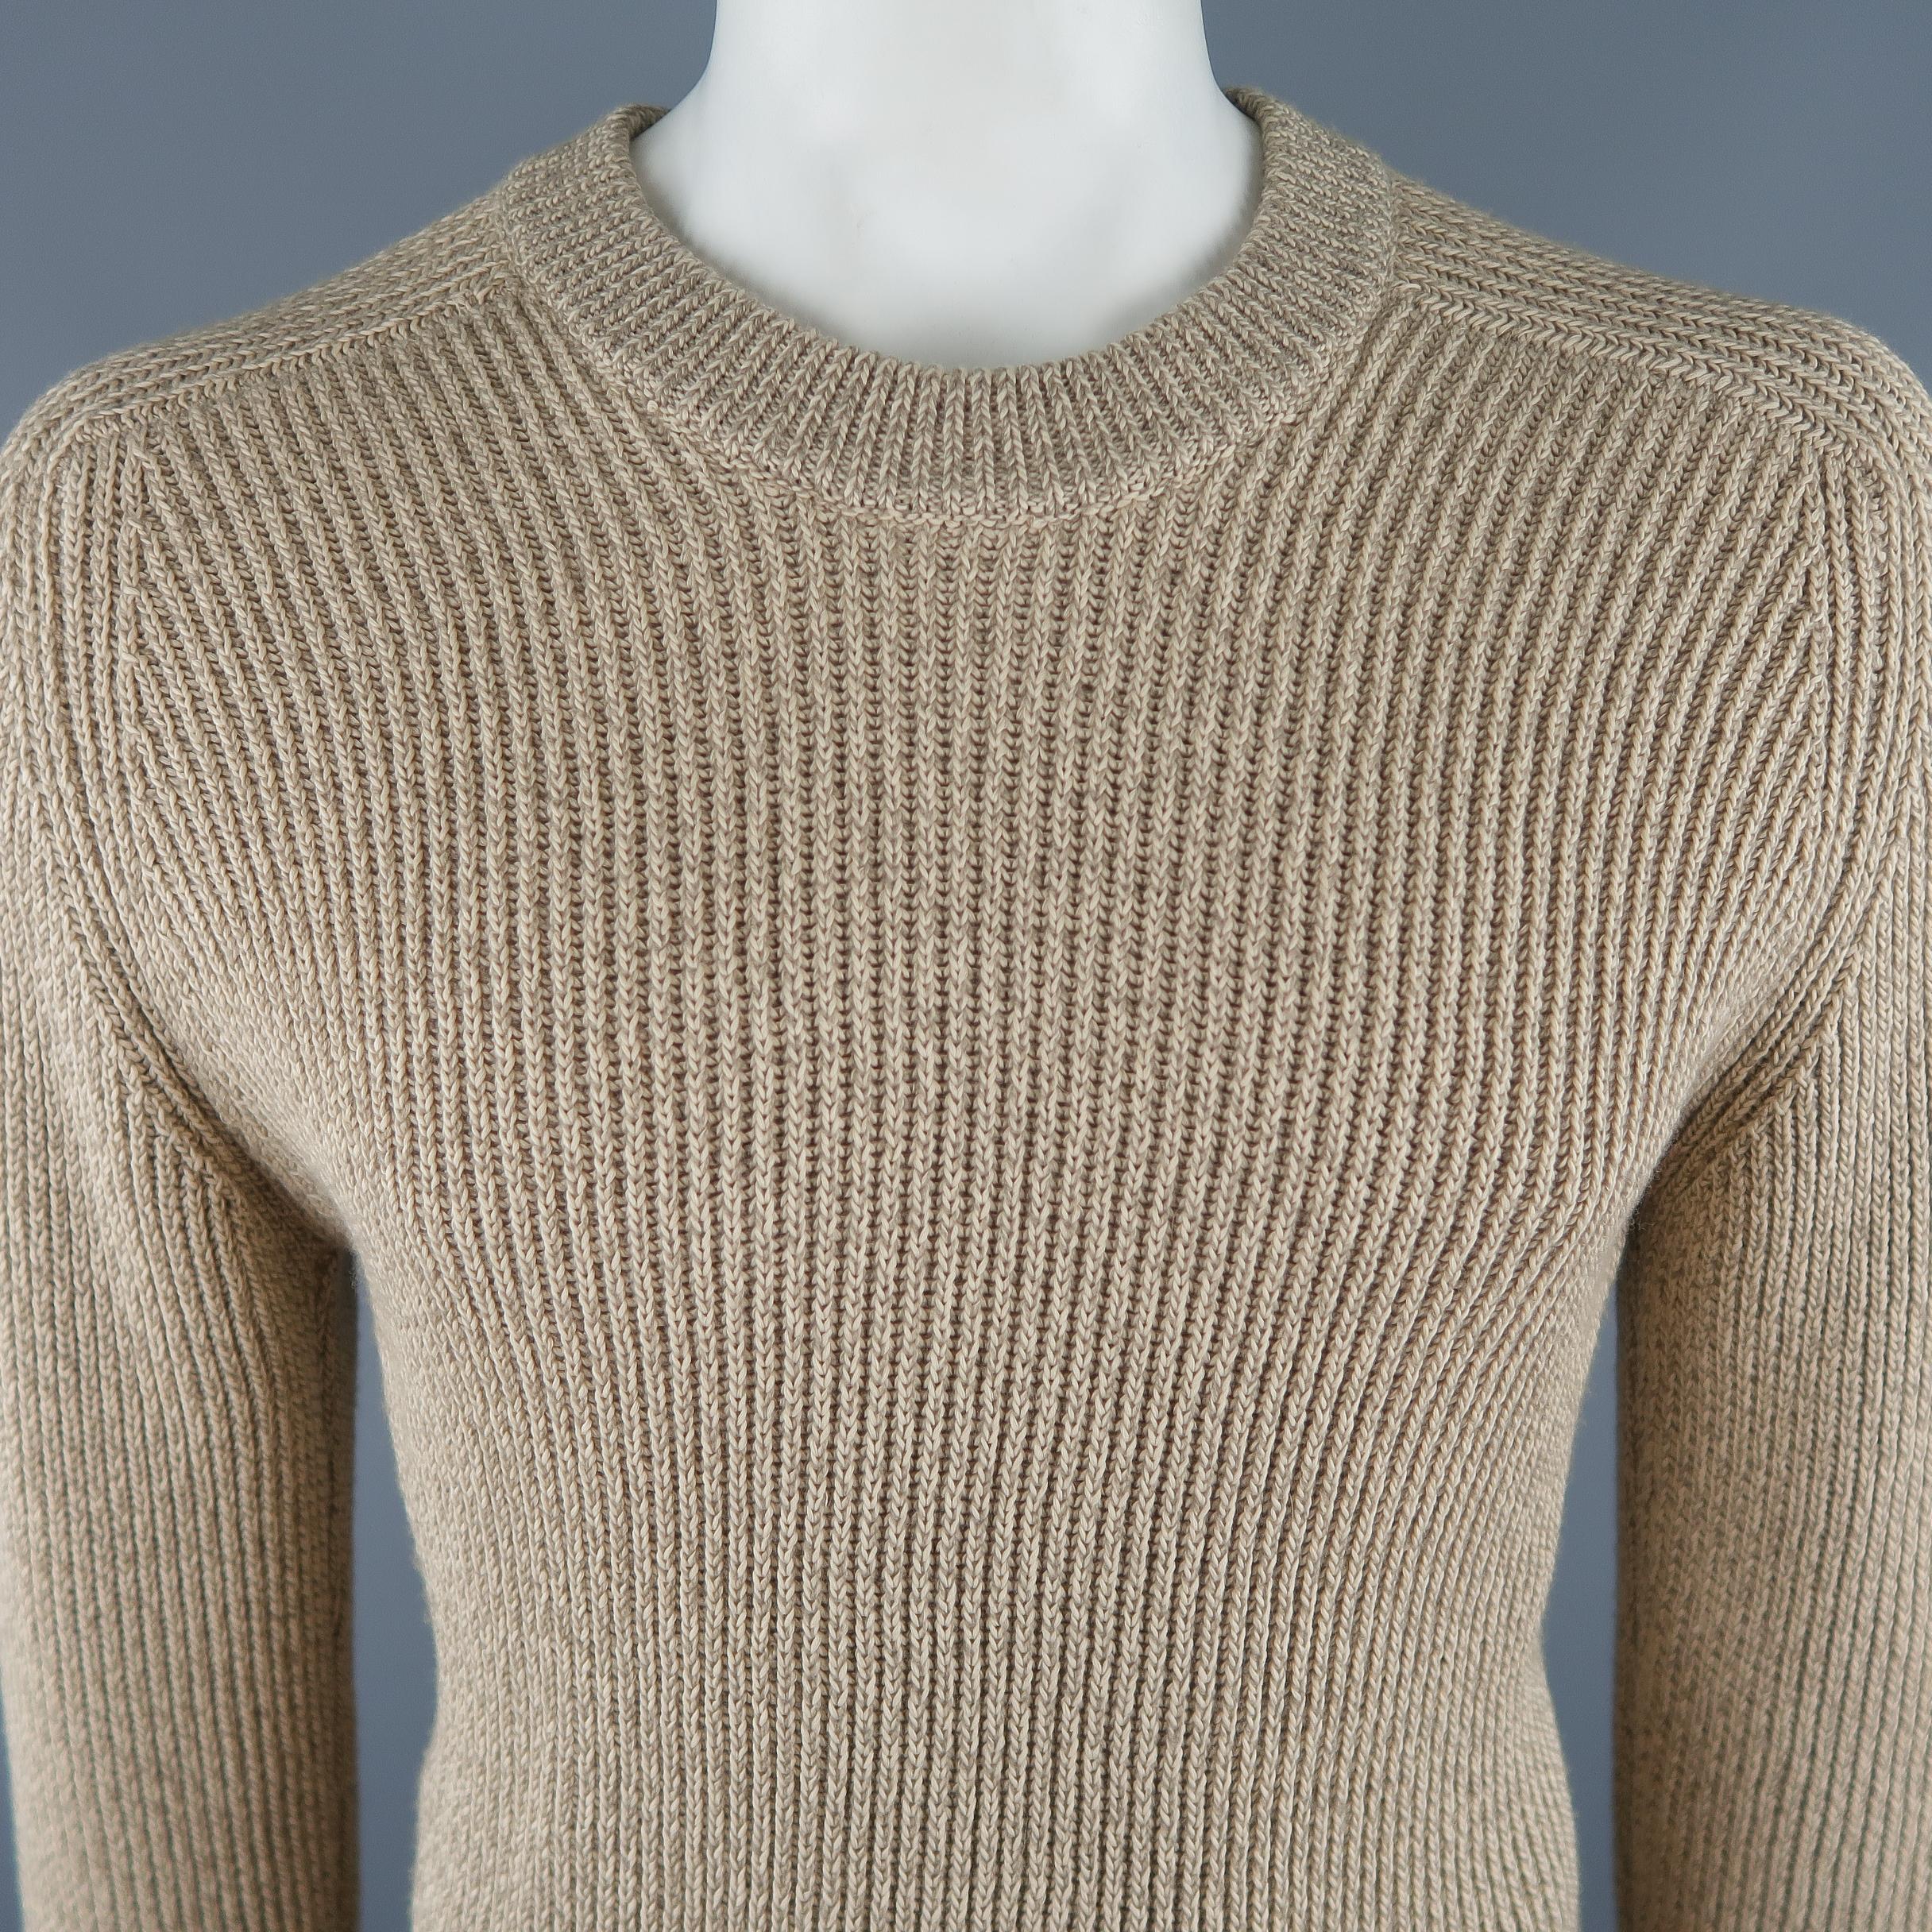 GUCCI Pullover Sweater comes in an oatmeal tone in a ribbed knit cotton material, with a crewneck. Made in Italy.
 
New With Tags.
Marked: M
 
Measurements:
 
Shoulder: 17.5 in.
Chest: 40 in.
Sleeve: 30 in.
Length: 30.5 in.